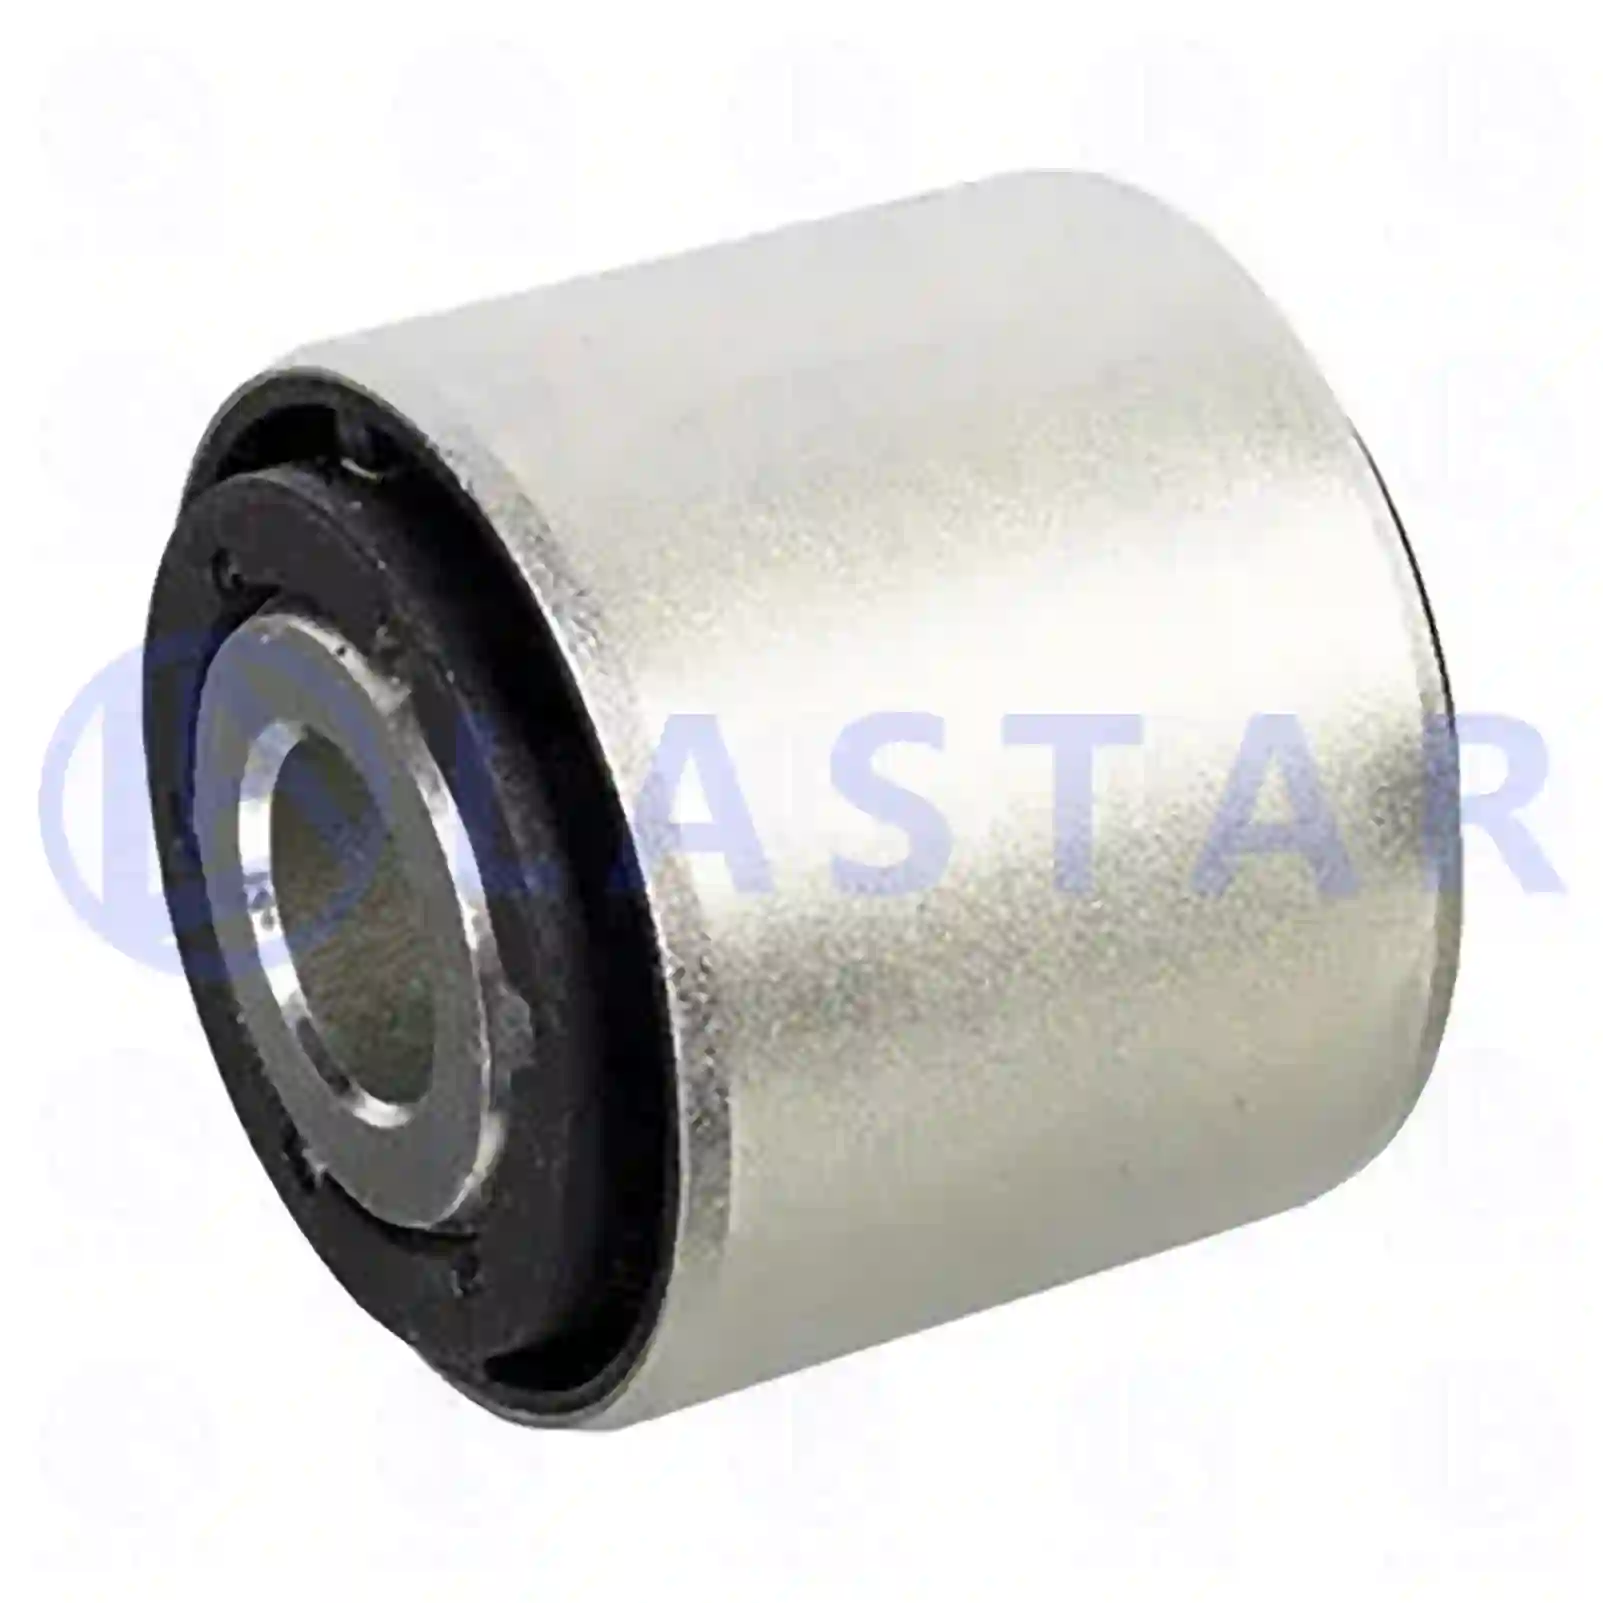 Bushing, stabilizer, 77727618, 2280638 ||  77727618 Lastar Spare Part | Truck Spare Parts, Auotomotive Spare Parts Bushing, stabilizer, 77727618, 2280638 ||  77727618 Lastar Spare Part | Truck Spare Parts, Auotomotive Spare Parts